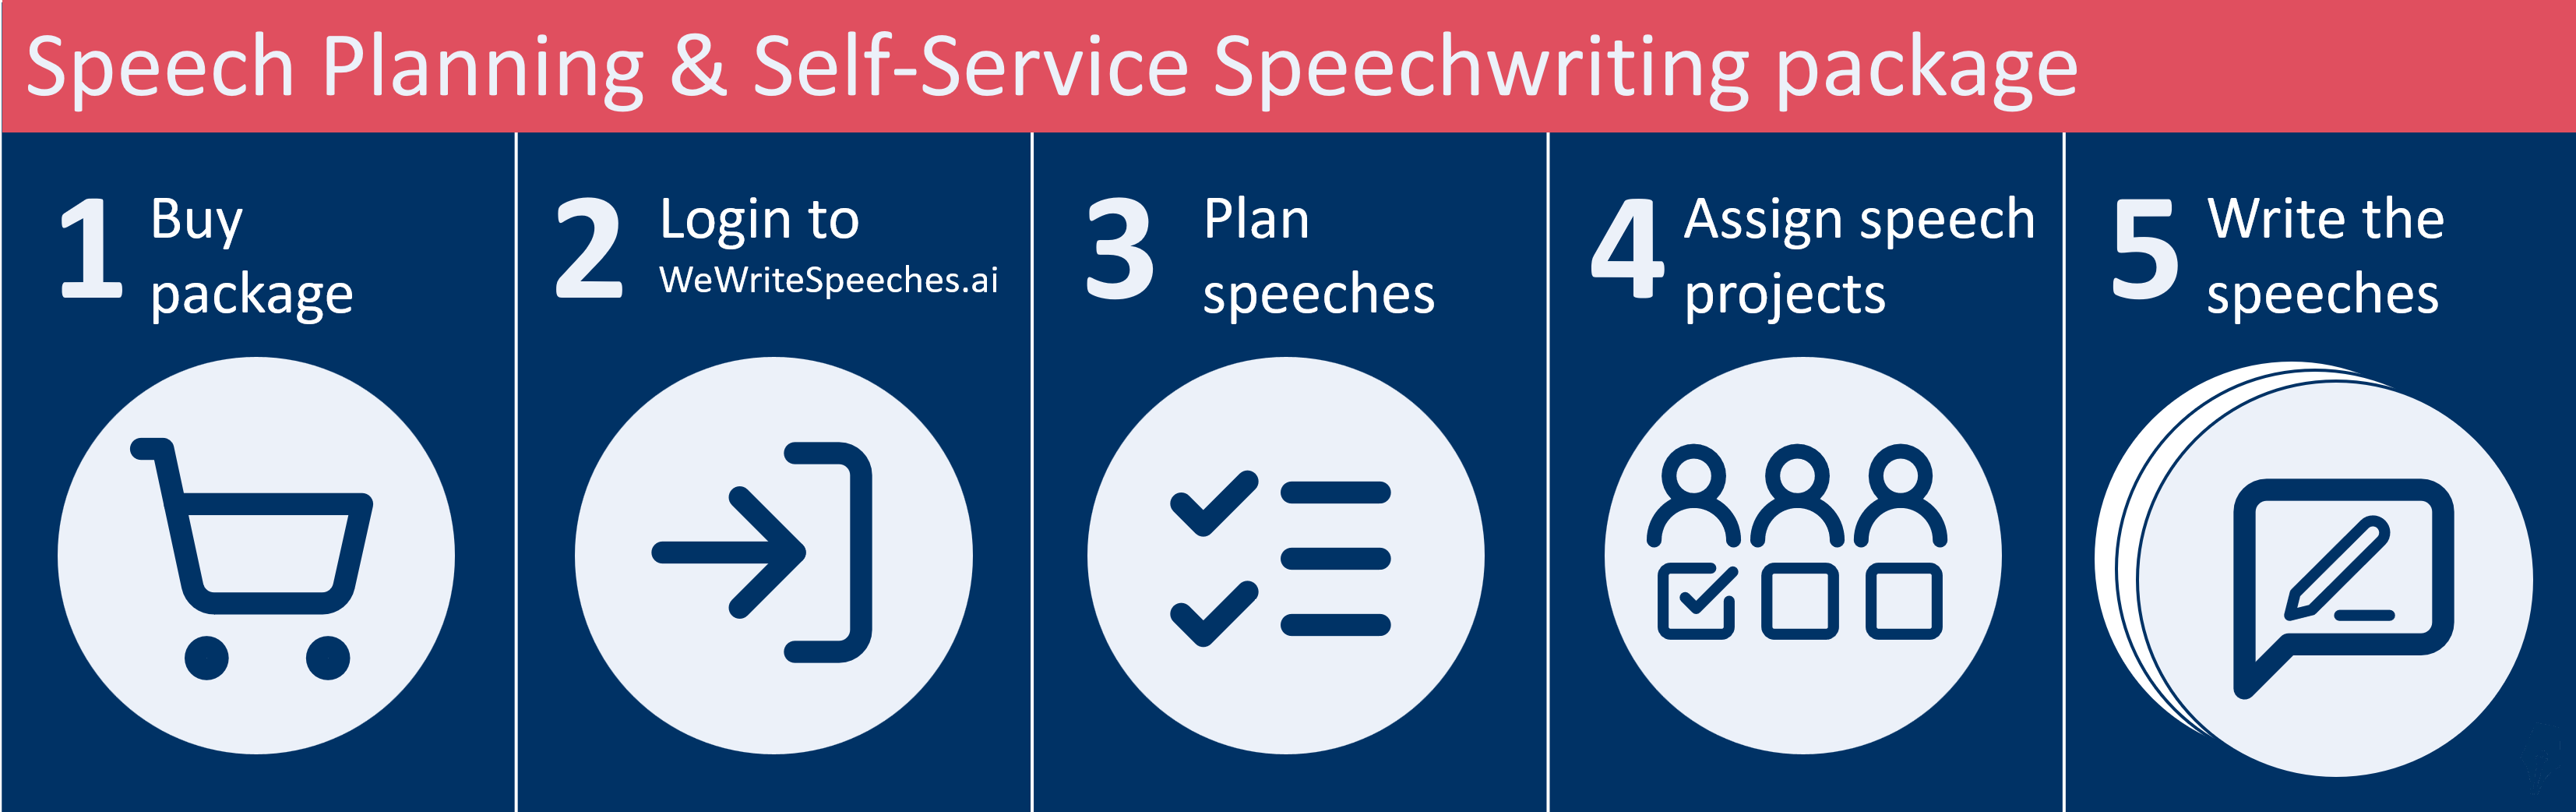 How our planning and speechwriting service works in practice